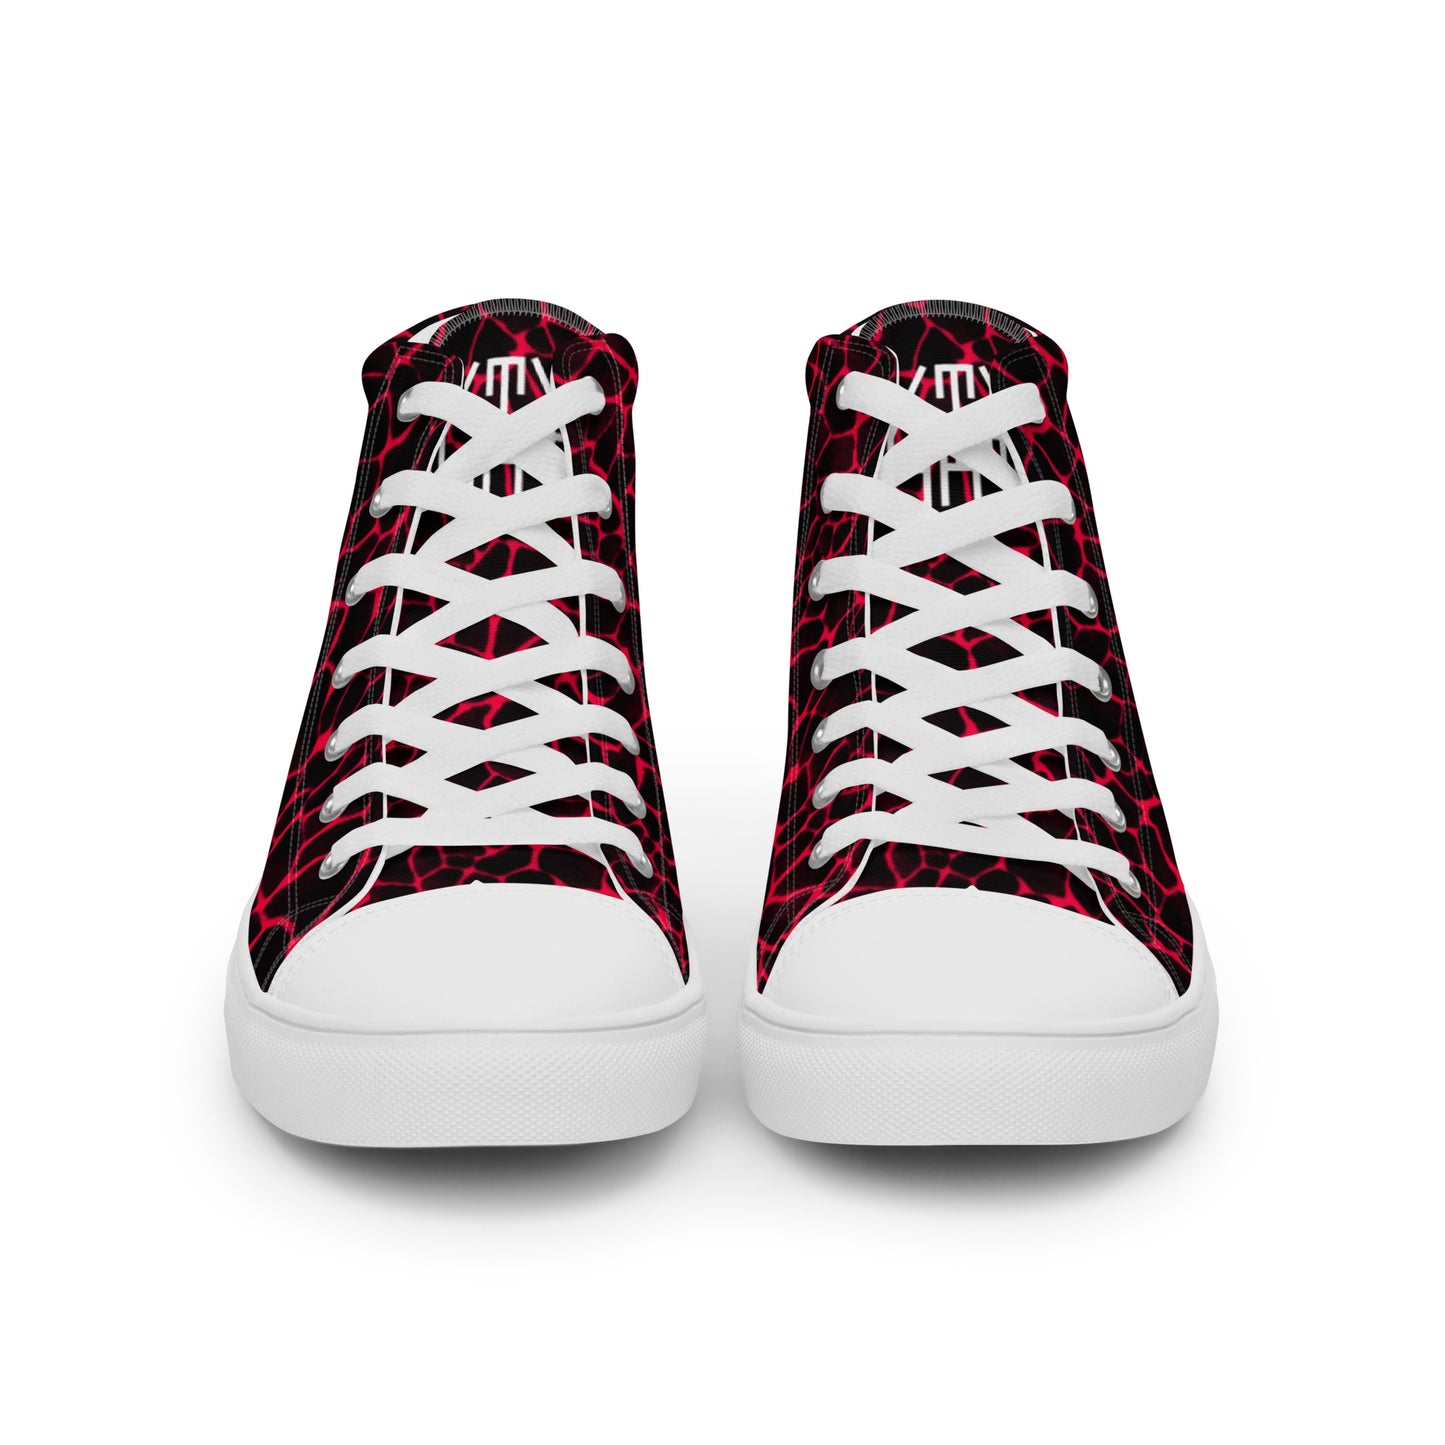 Sixty Eight 93 Logo White Boa Red & Black Men's High Top Shoes